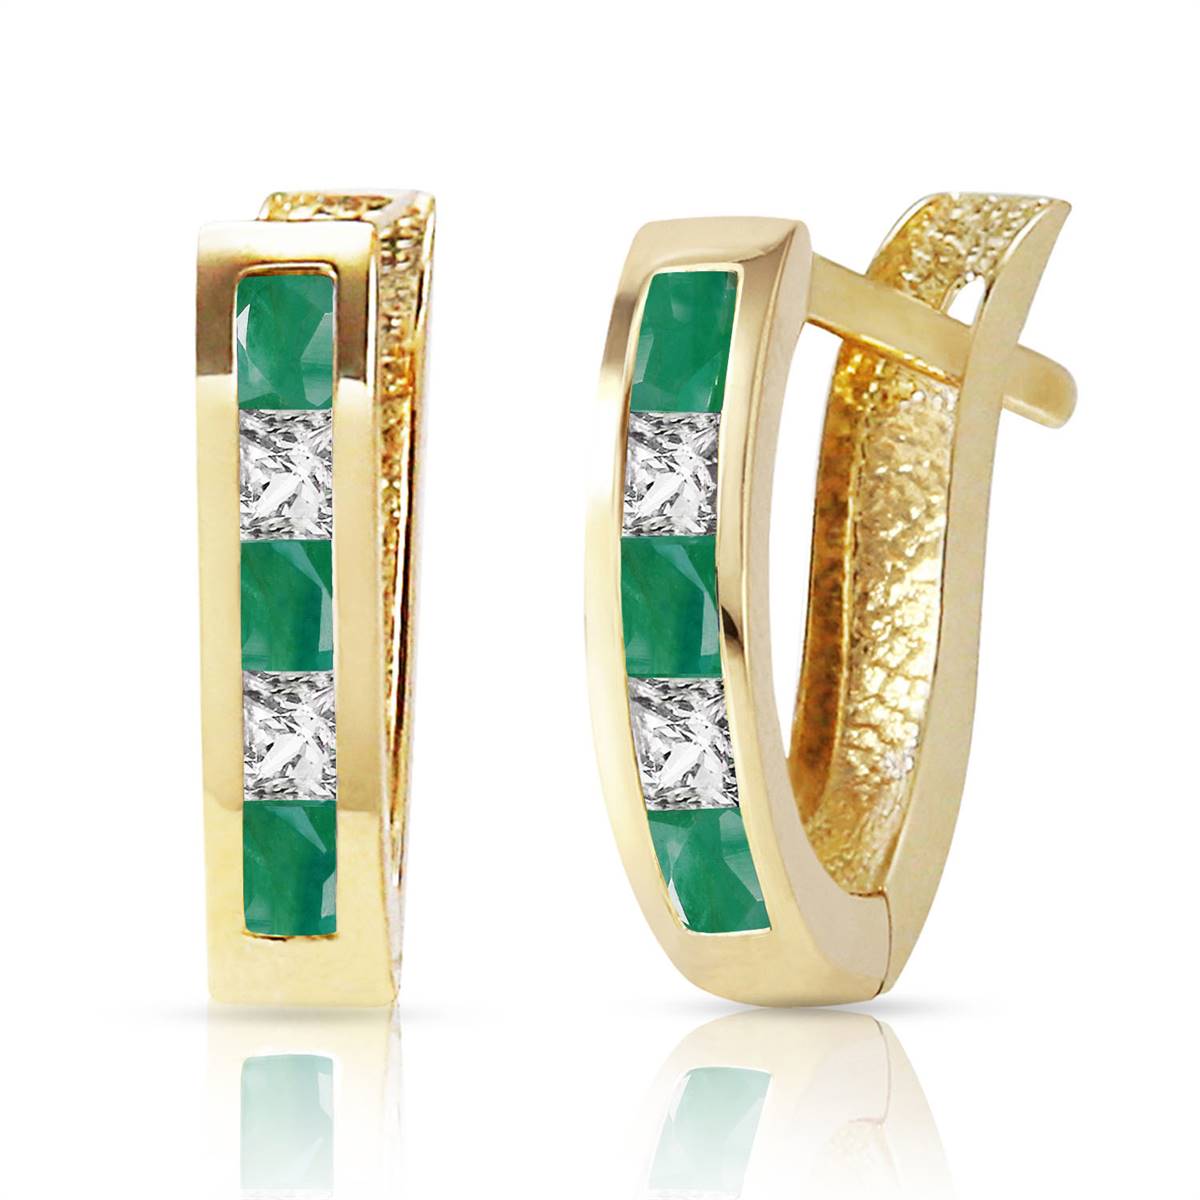 1.26 Carat 14K Solid Yellow Gold Italia Emerald Whote Topaz Earrings